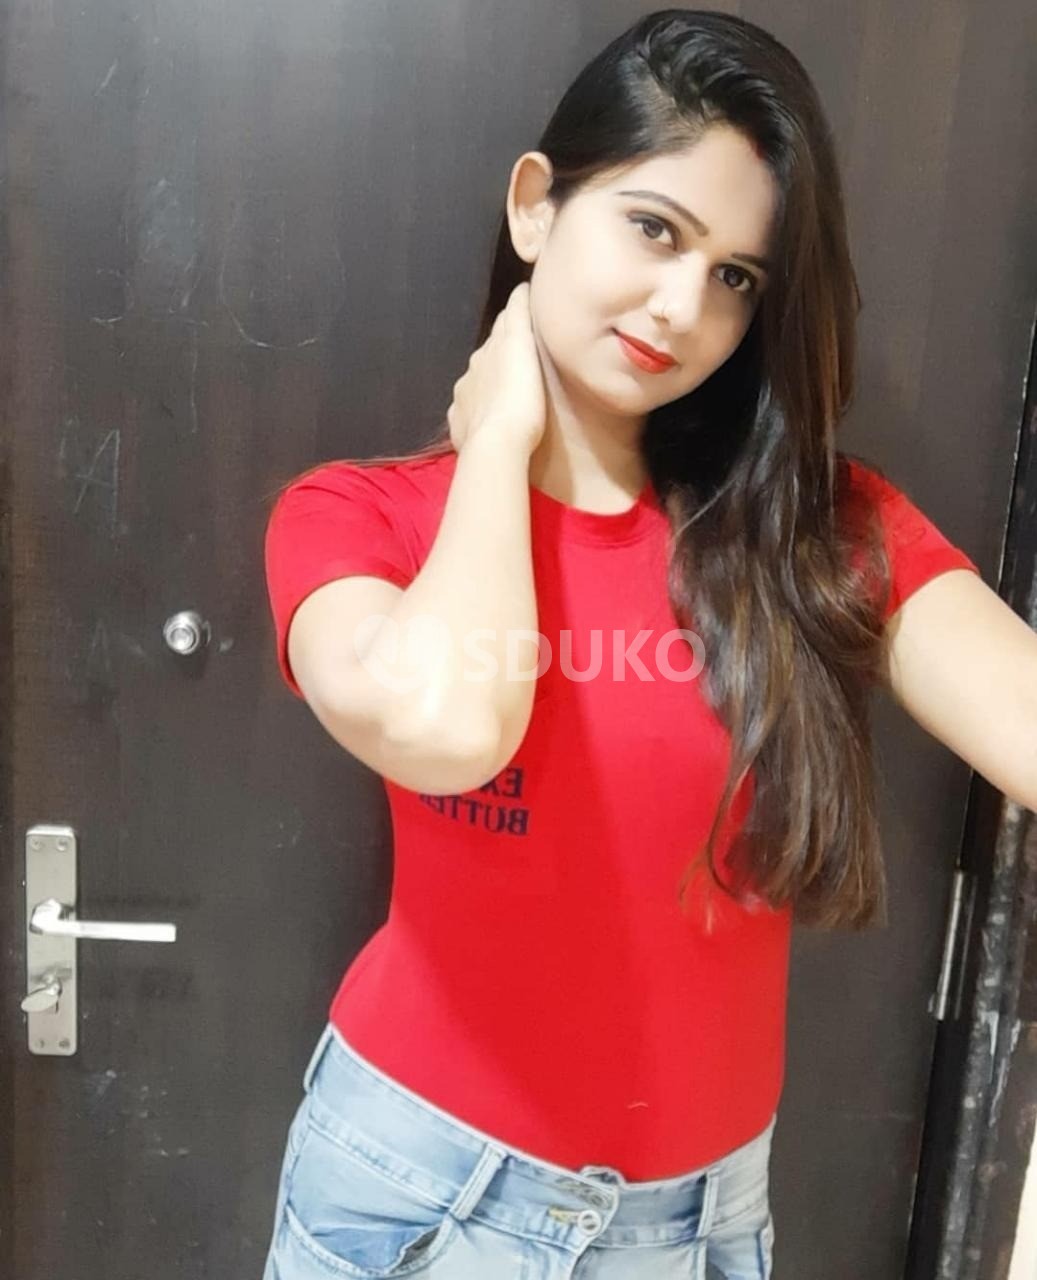 Amritsar ☎️ VIP LOW RATE (Kavya) ESCORT FULL HARD FUCK WITH NAUGHTY IF YOU WANT TO FUCK MY PUSSY WITH BIG BOOBS GIRL